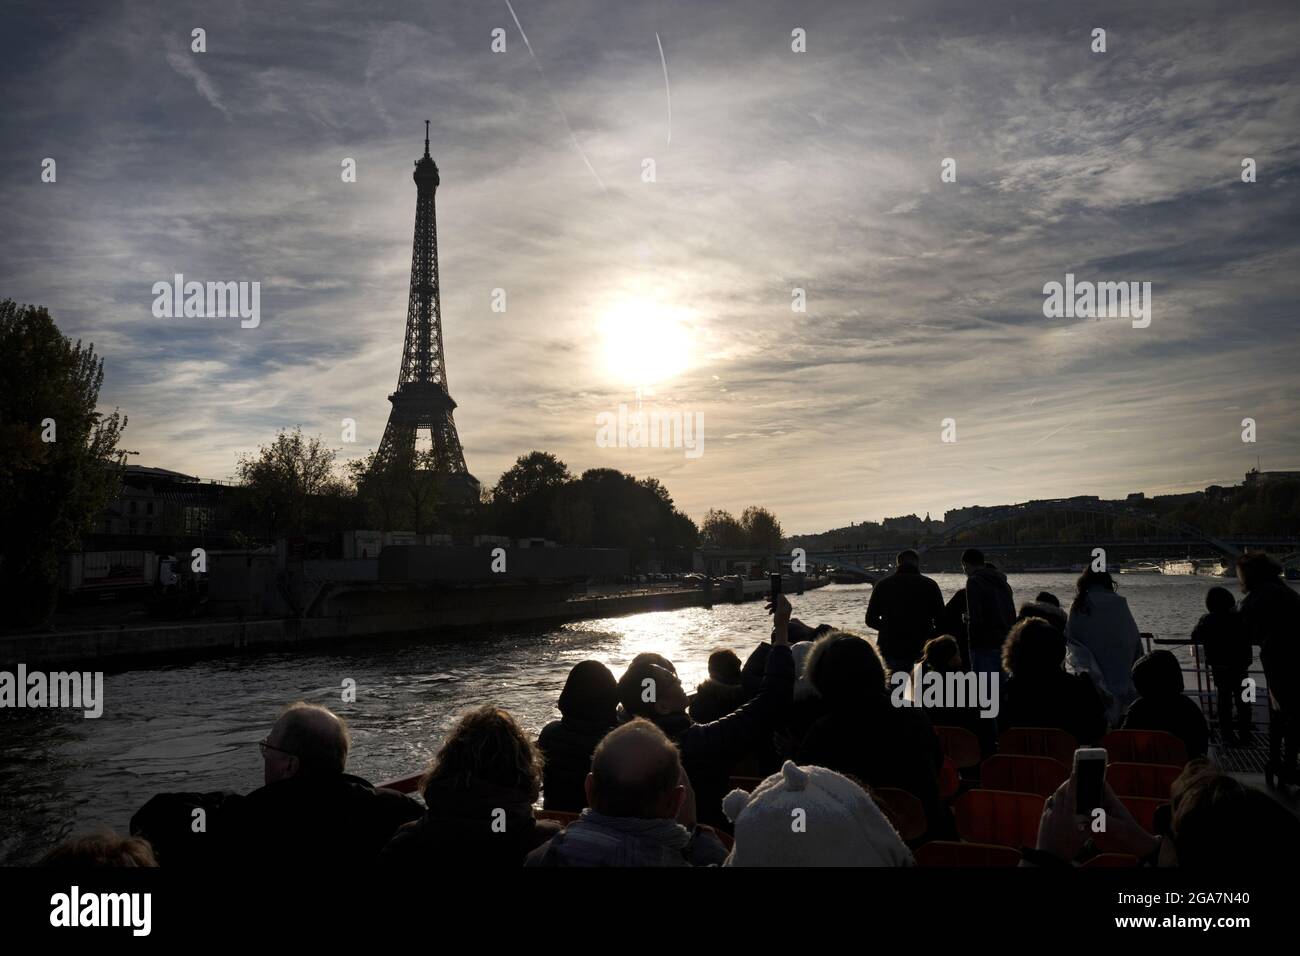 The Tour Eiffel seen from a turisti boat on the Seine river  in Paris. Stock Photo